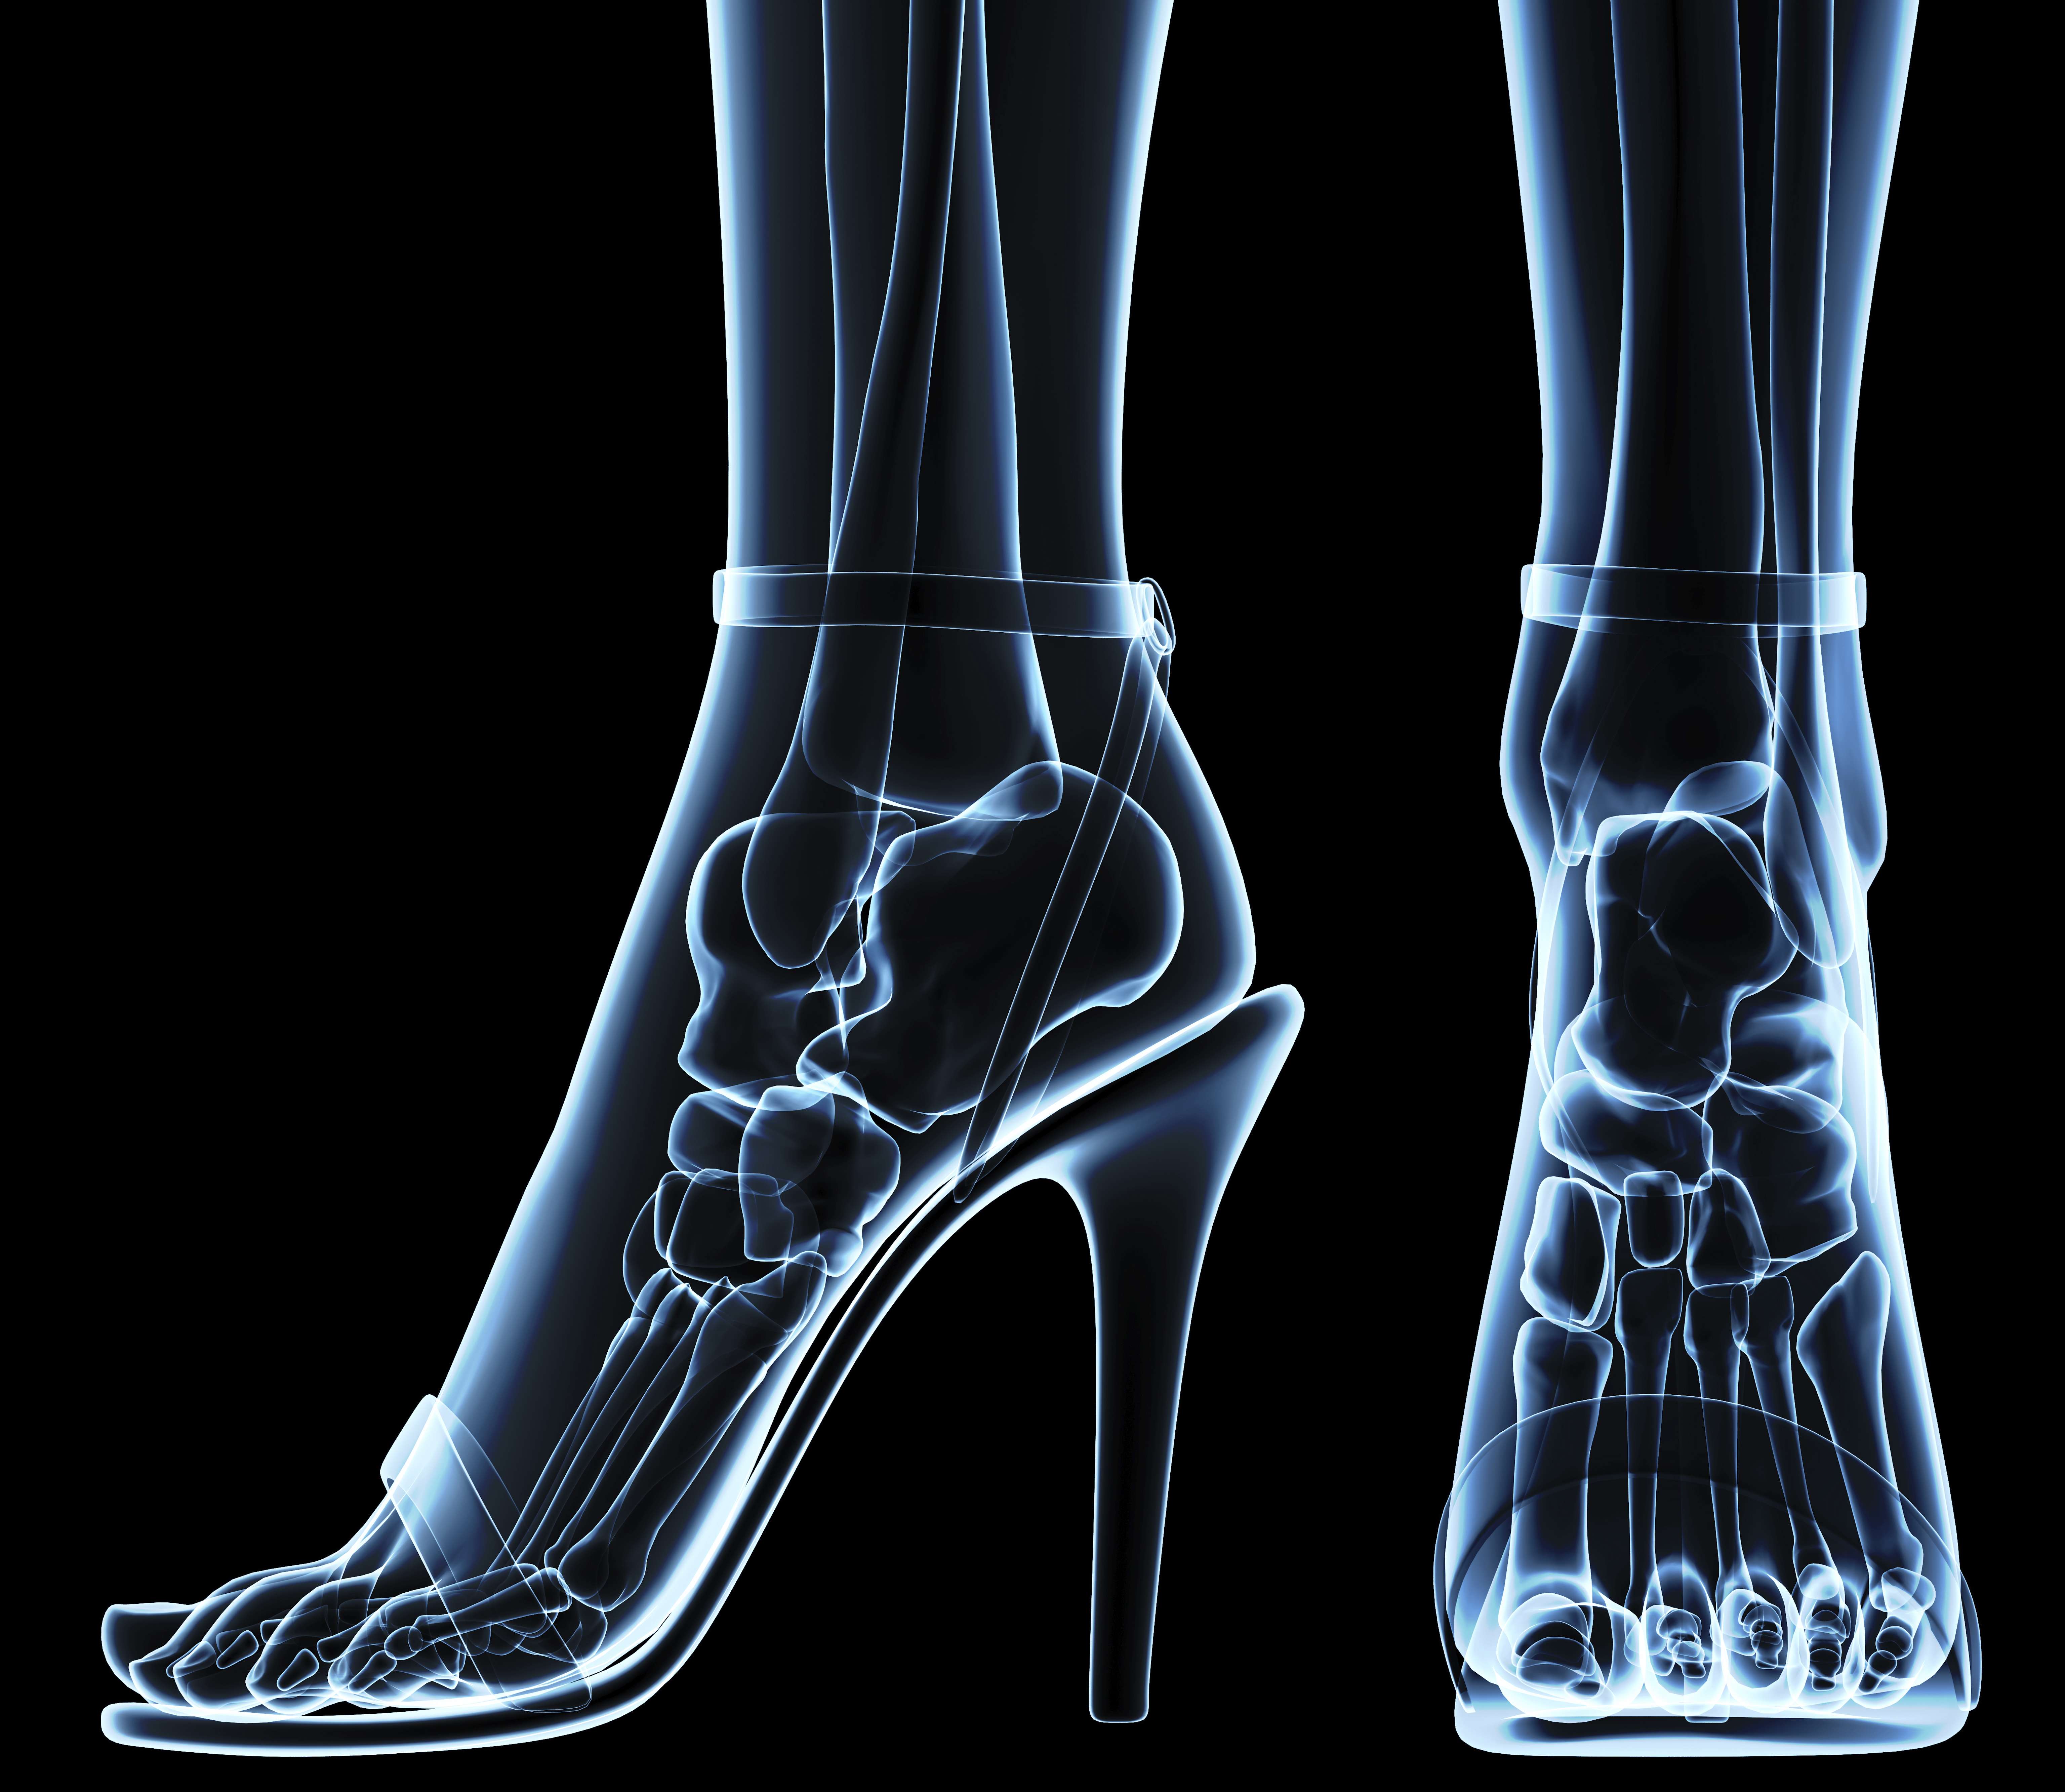 High heels may be fashionable, but they’re not healthy for the human feet.